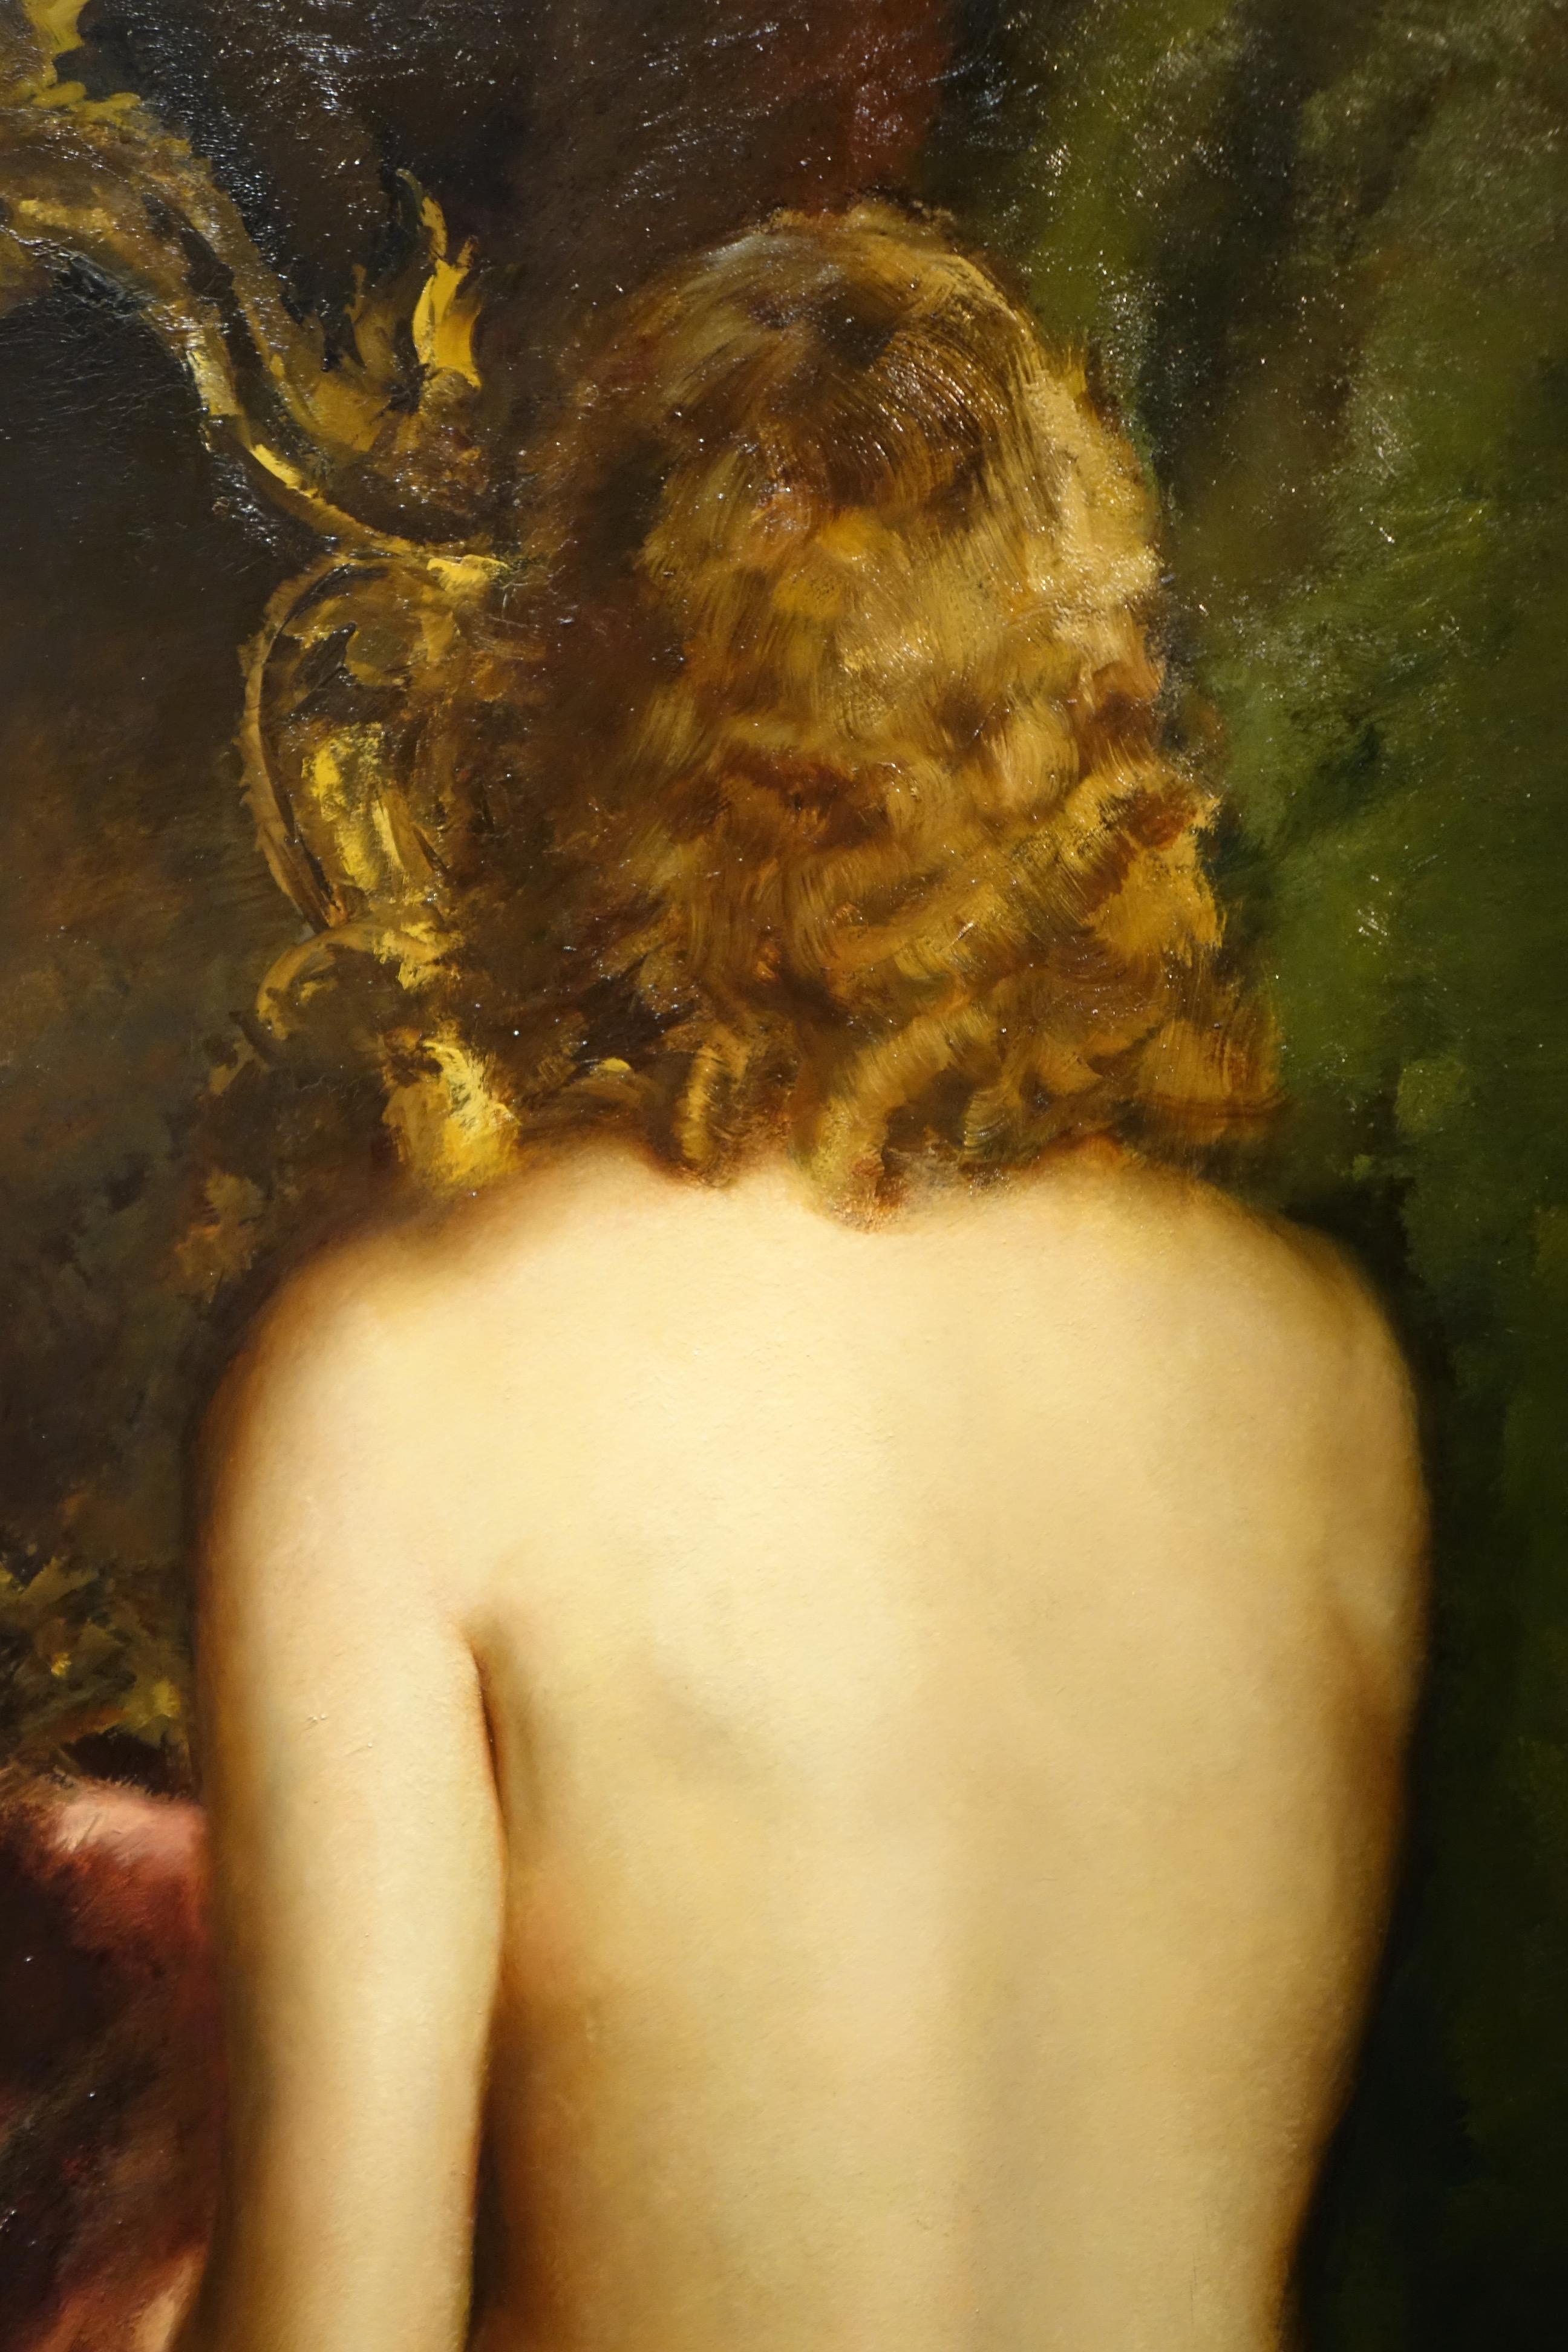 Canvas Large nude back study painting-G.P. RESTELLINI 1931 For Sale